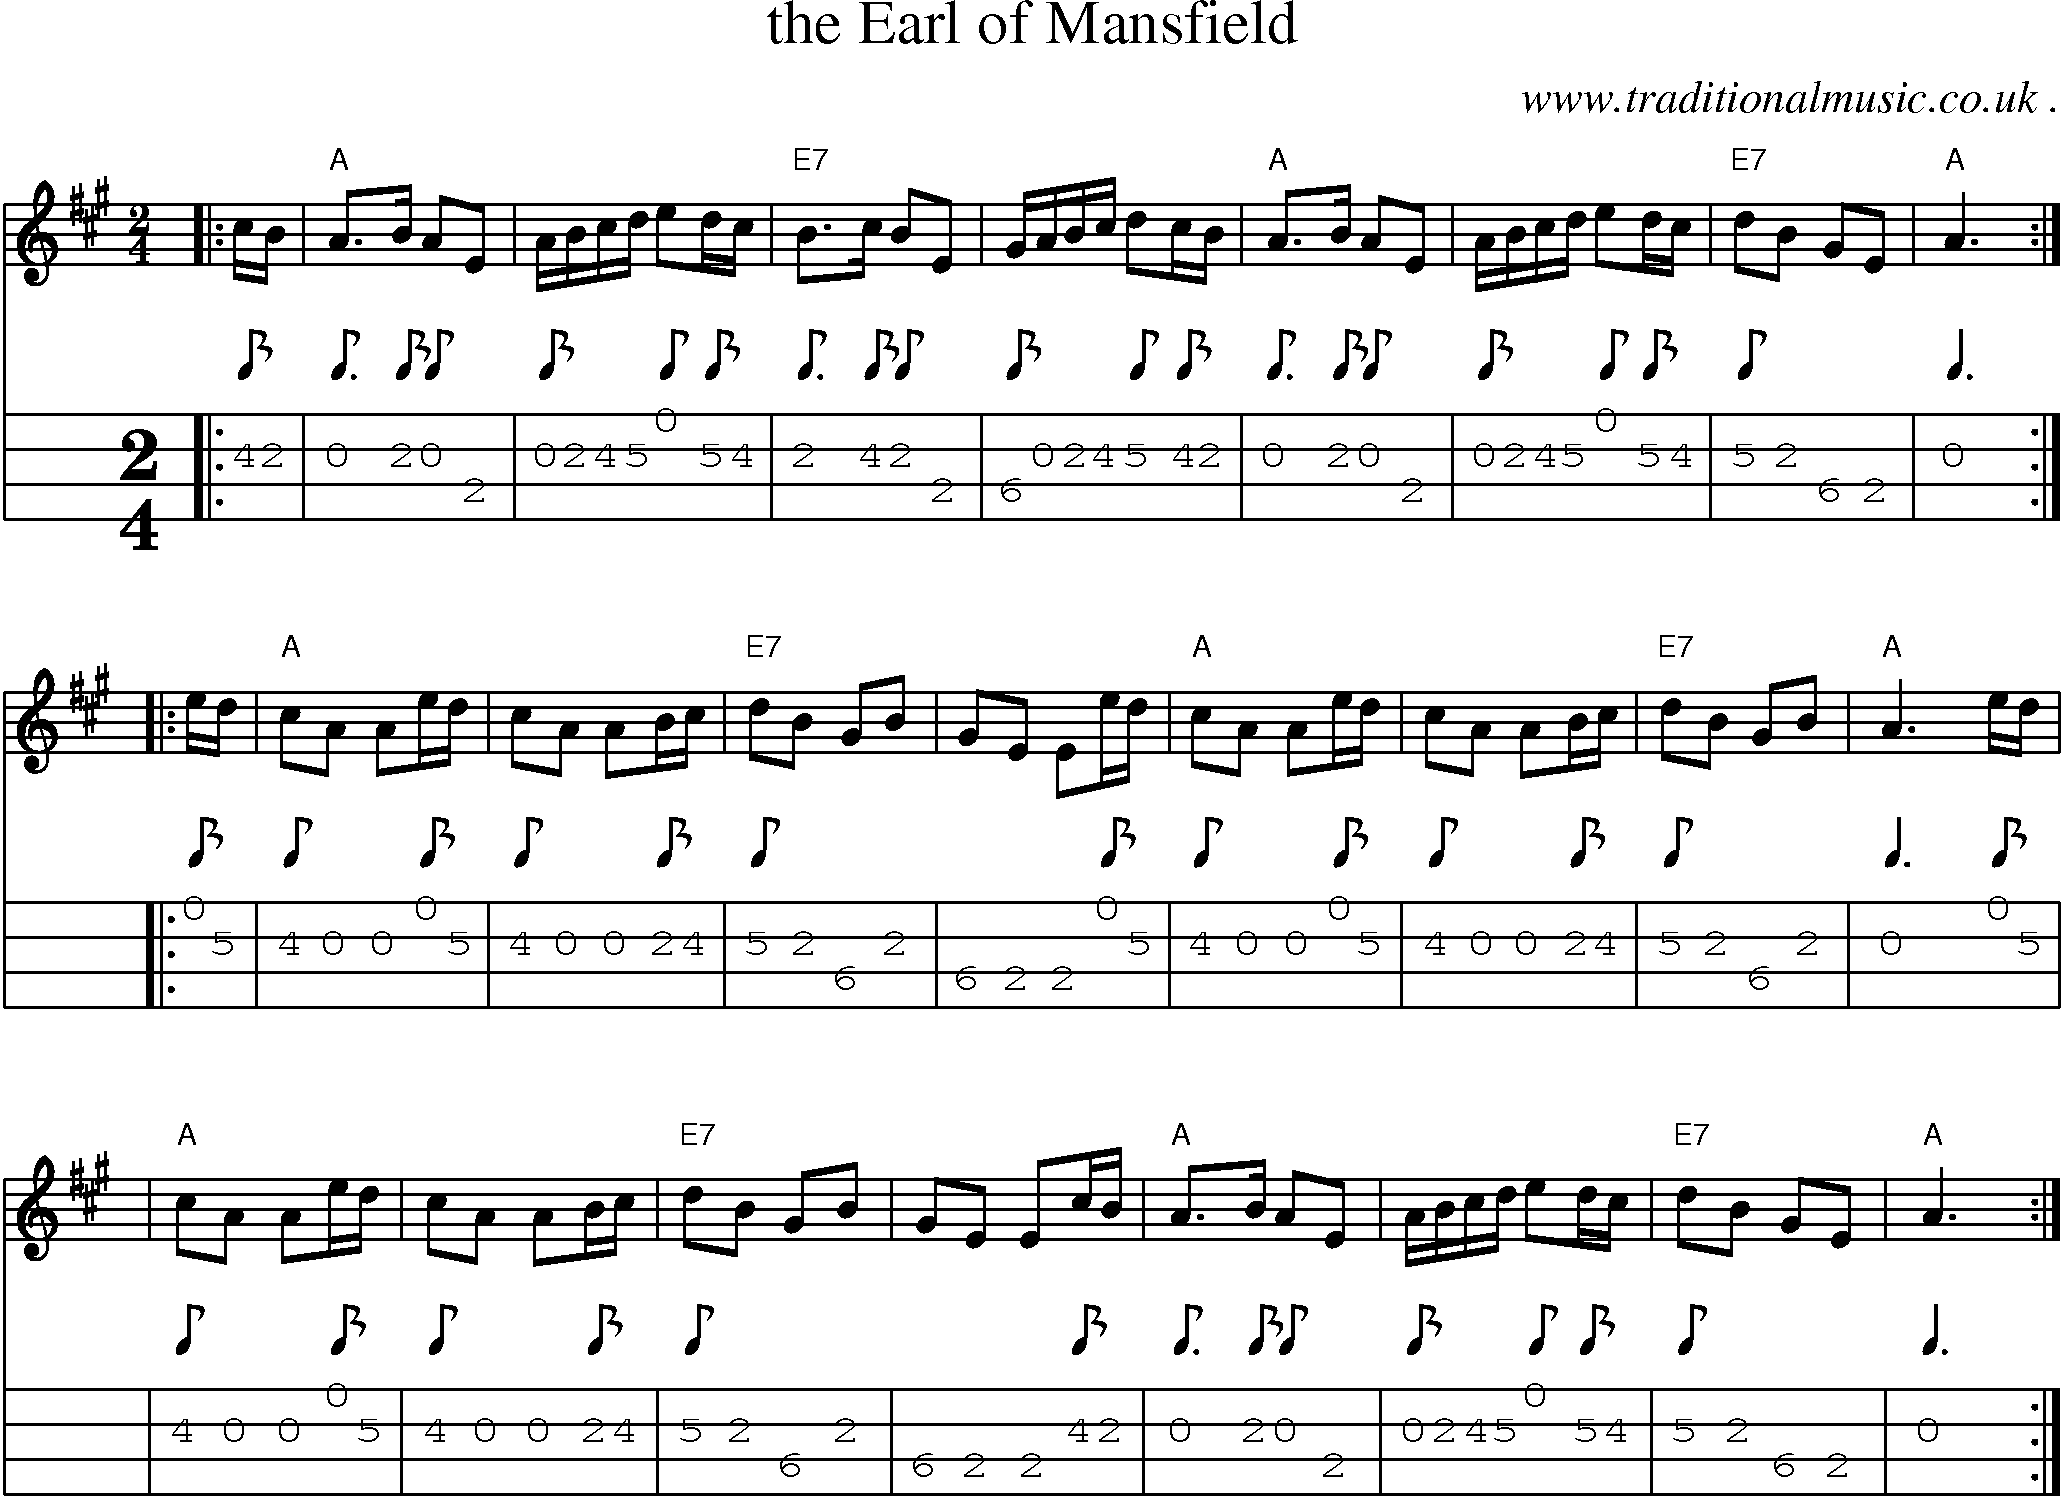 Sheet-music  score, Chords and Mandolin Tabs for The Earl Of Mansfield